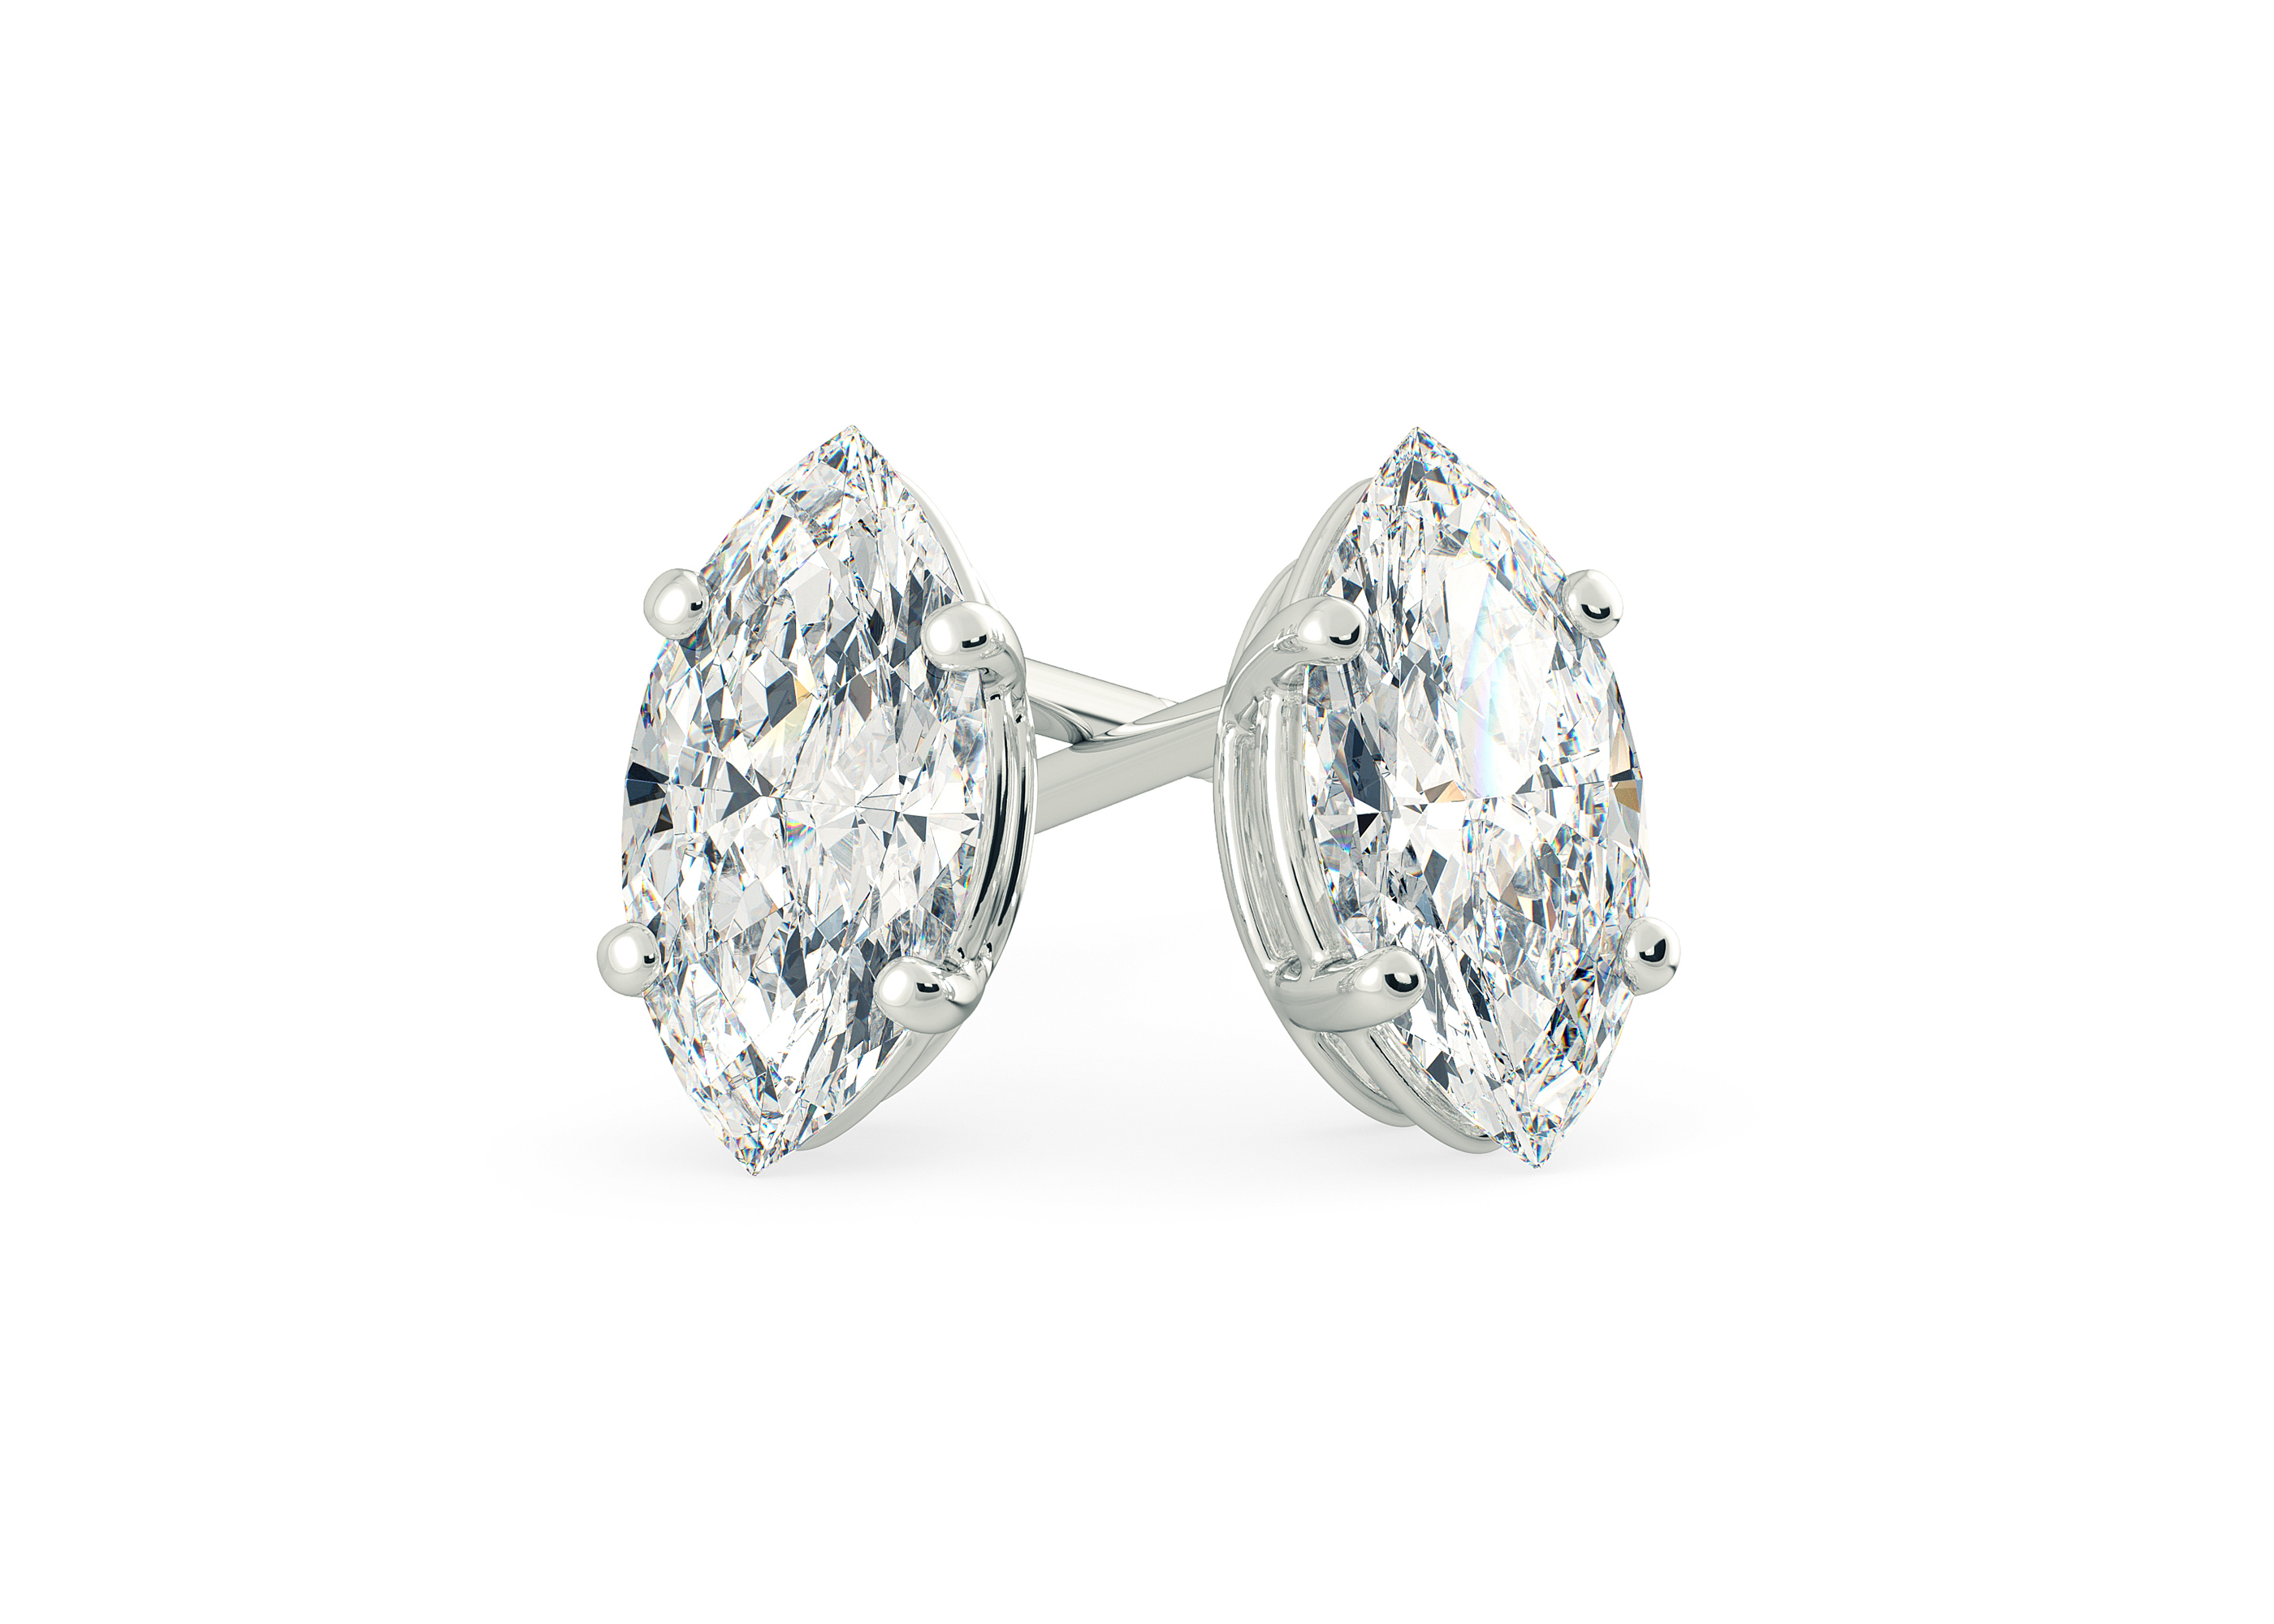 Ettore Marquise Diamond Stud Earrings in 18K White Gold with Screw Backs